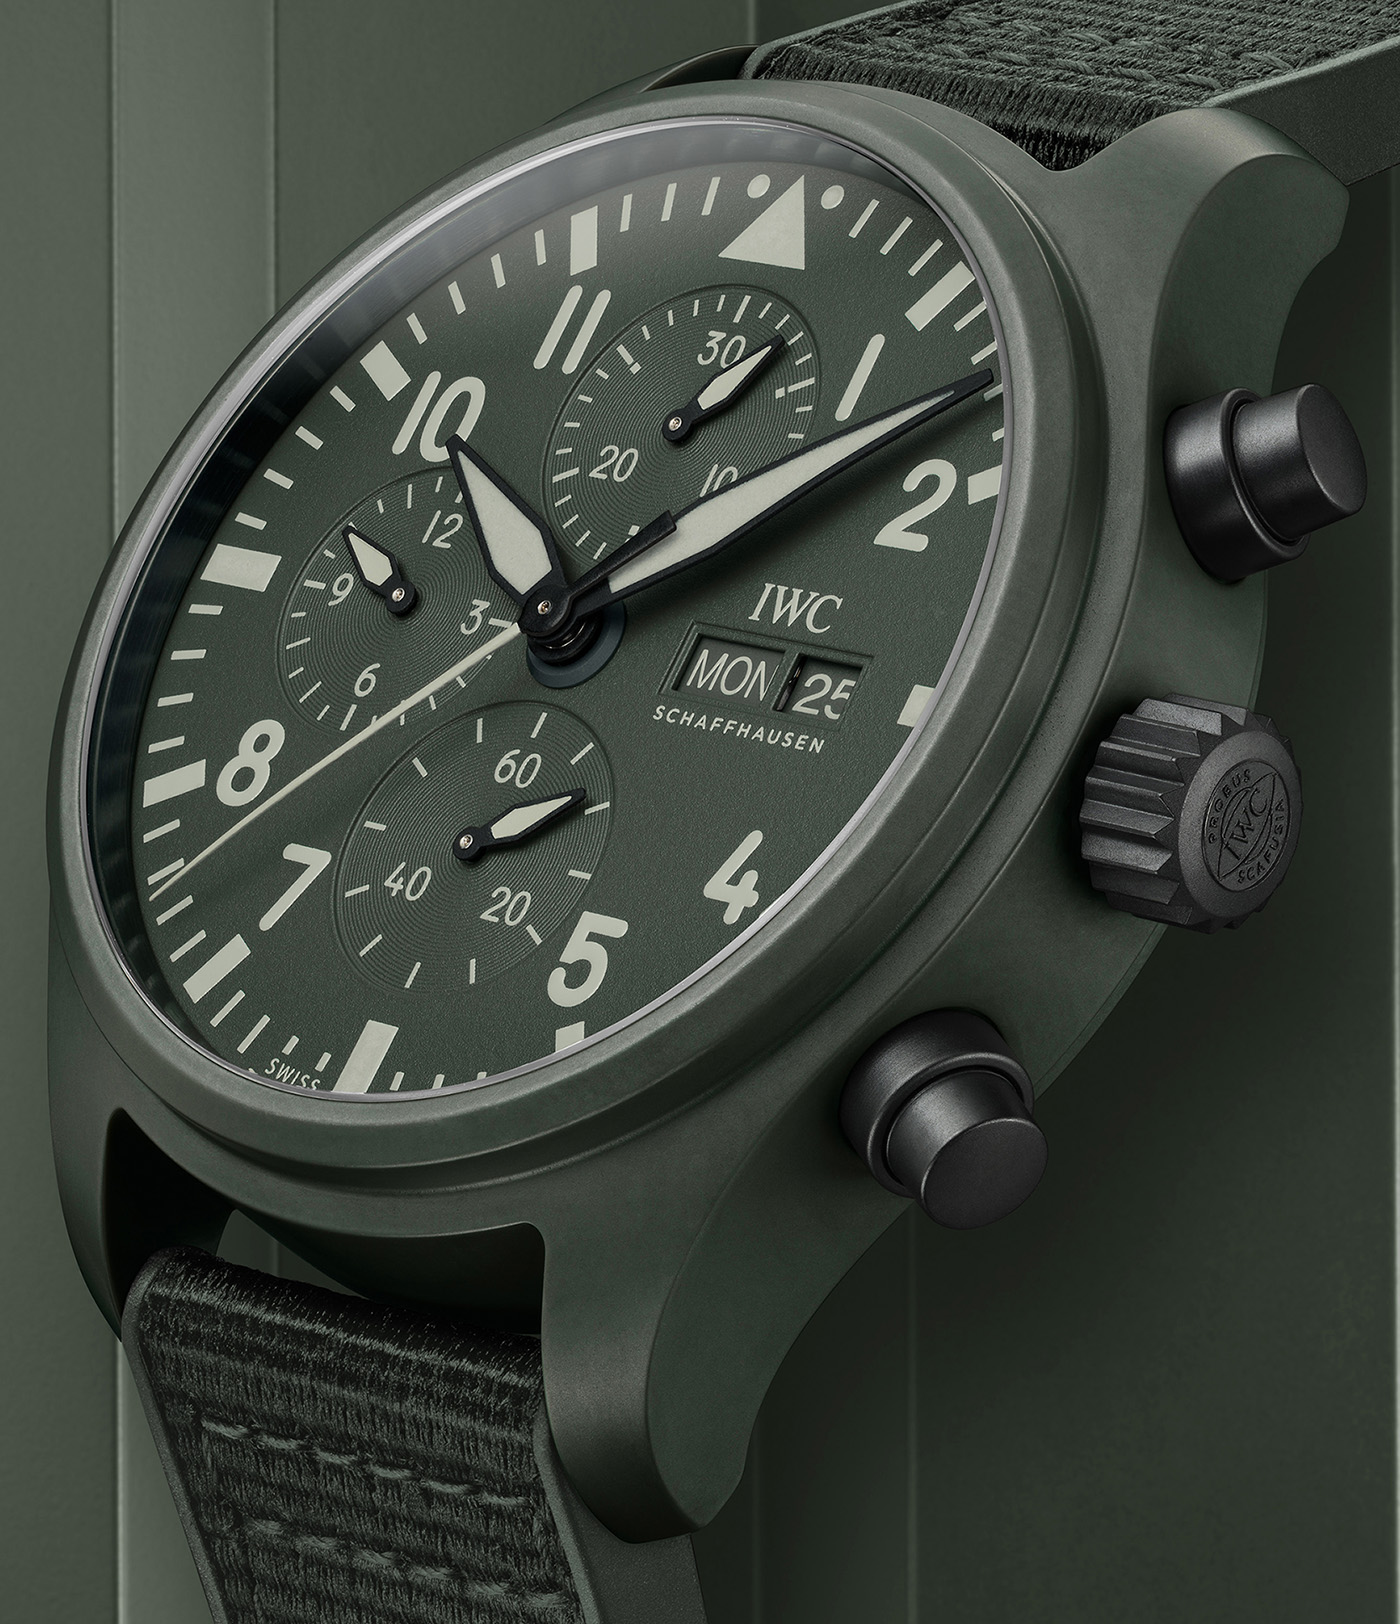 Blive kold Virksomhedsbeskrivelse tårn First Look: IWC Unveils Limited-Production Pilot's Watch Chronograph TOP GUN  Edition “Lake Tahoe” And Edition “Woodland” | aBlogtoWatch